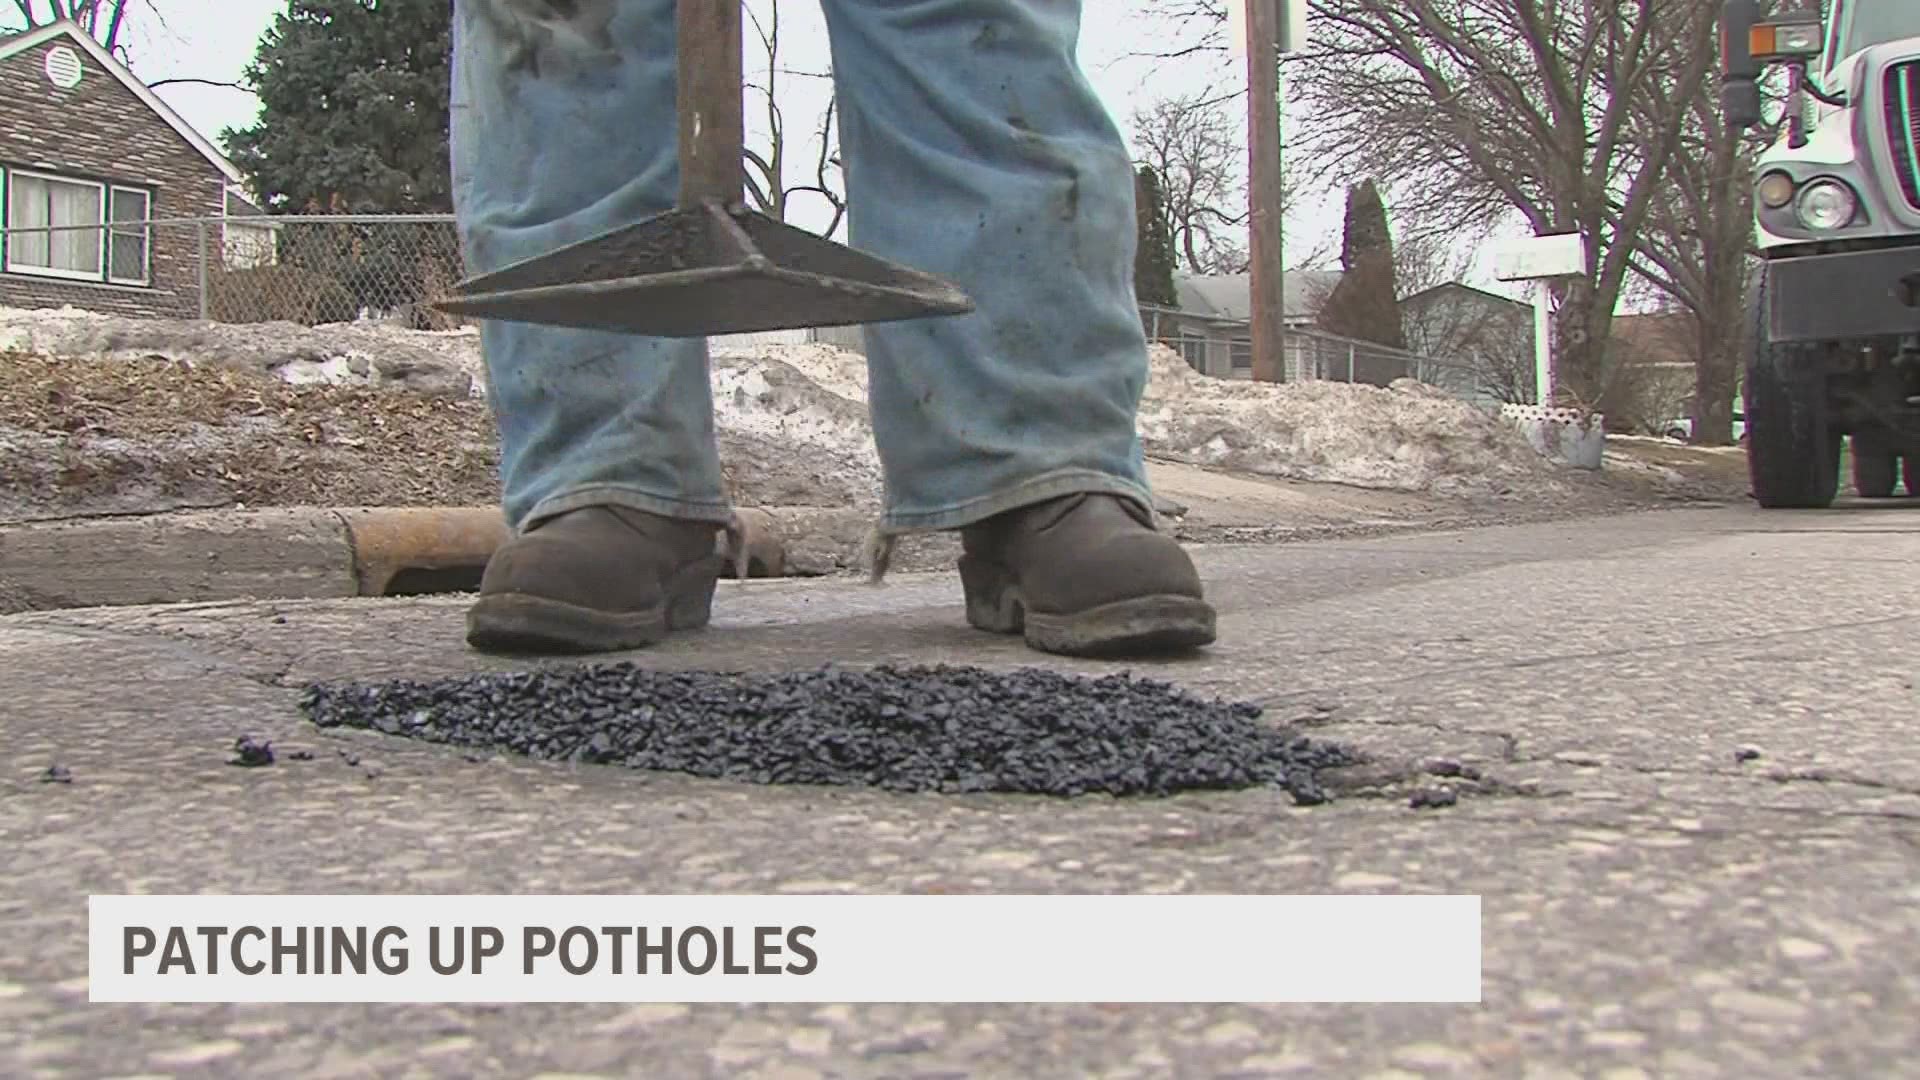 For the week of Feb. 22, reports of potholes increased by six times the number of the previous week.